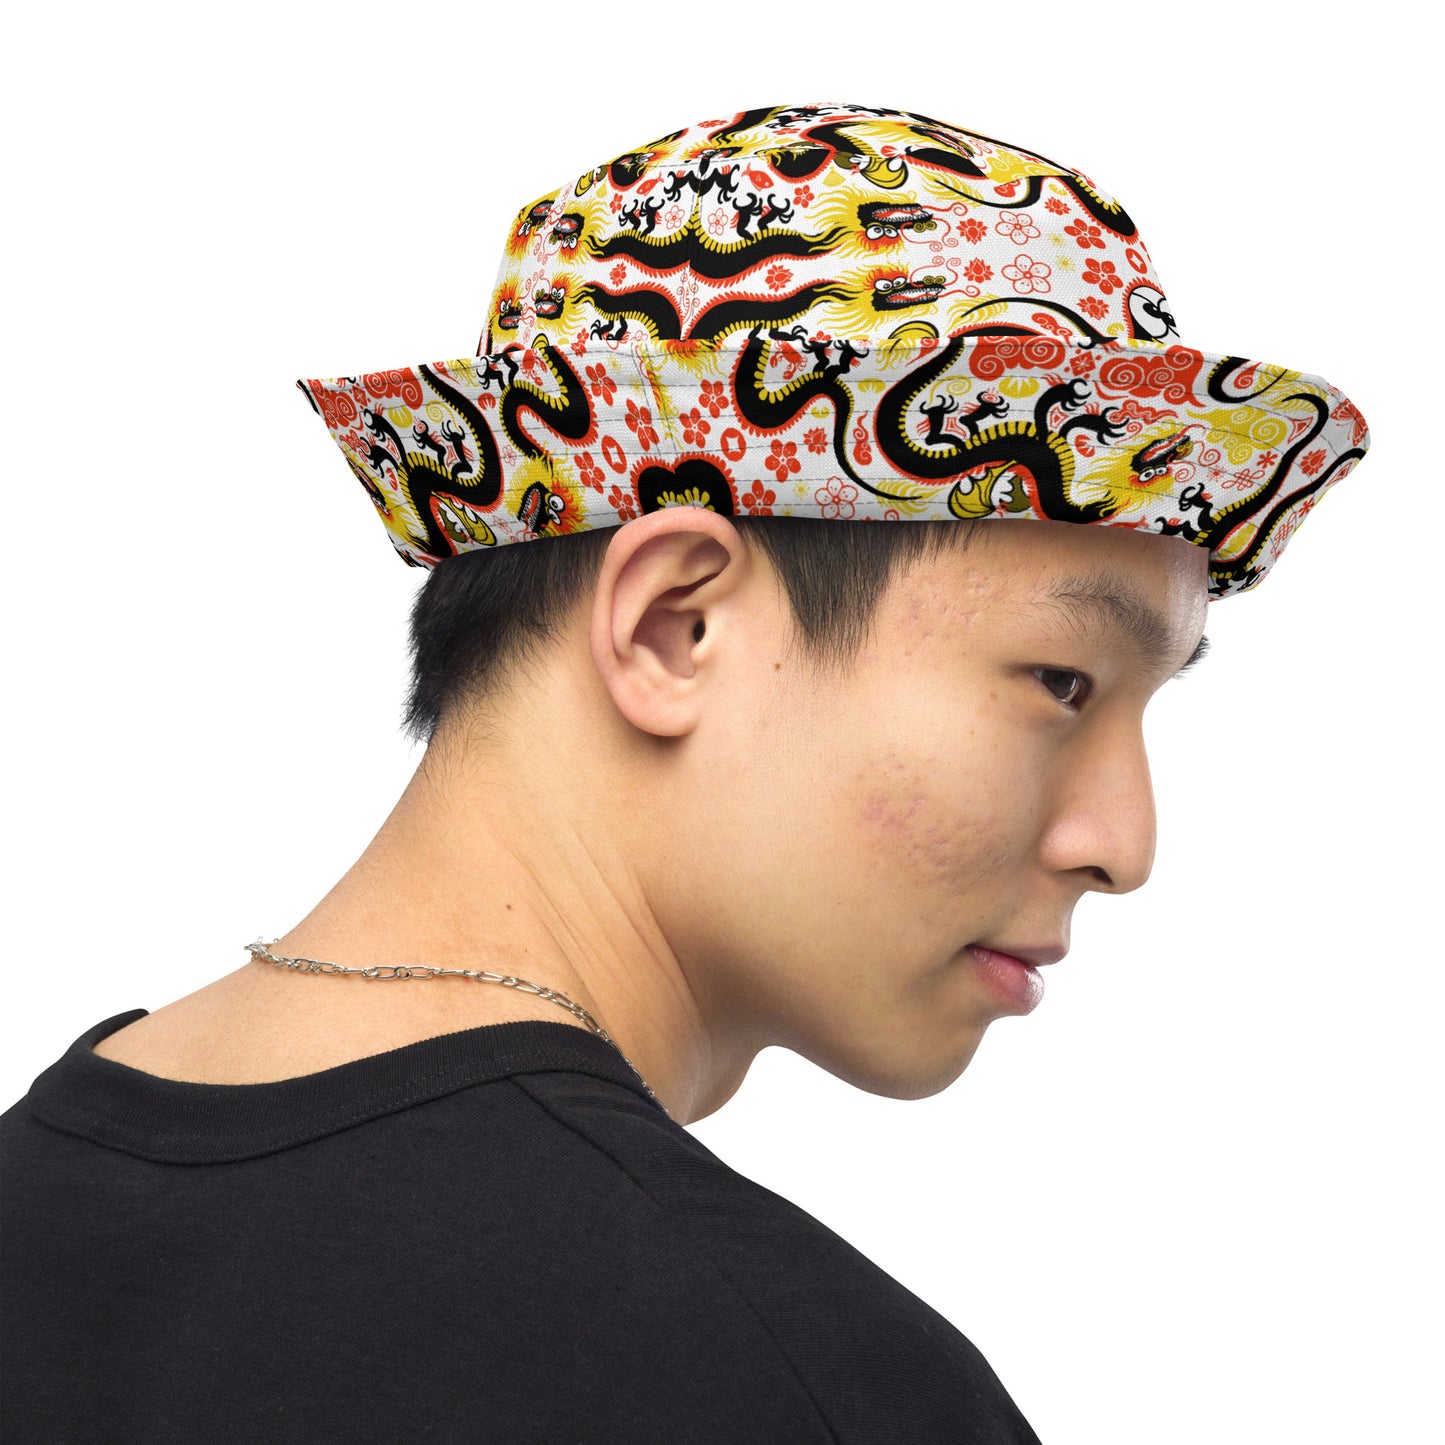 Legendary chinese dragons pattern art Reversible bucket hat. Side view